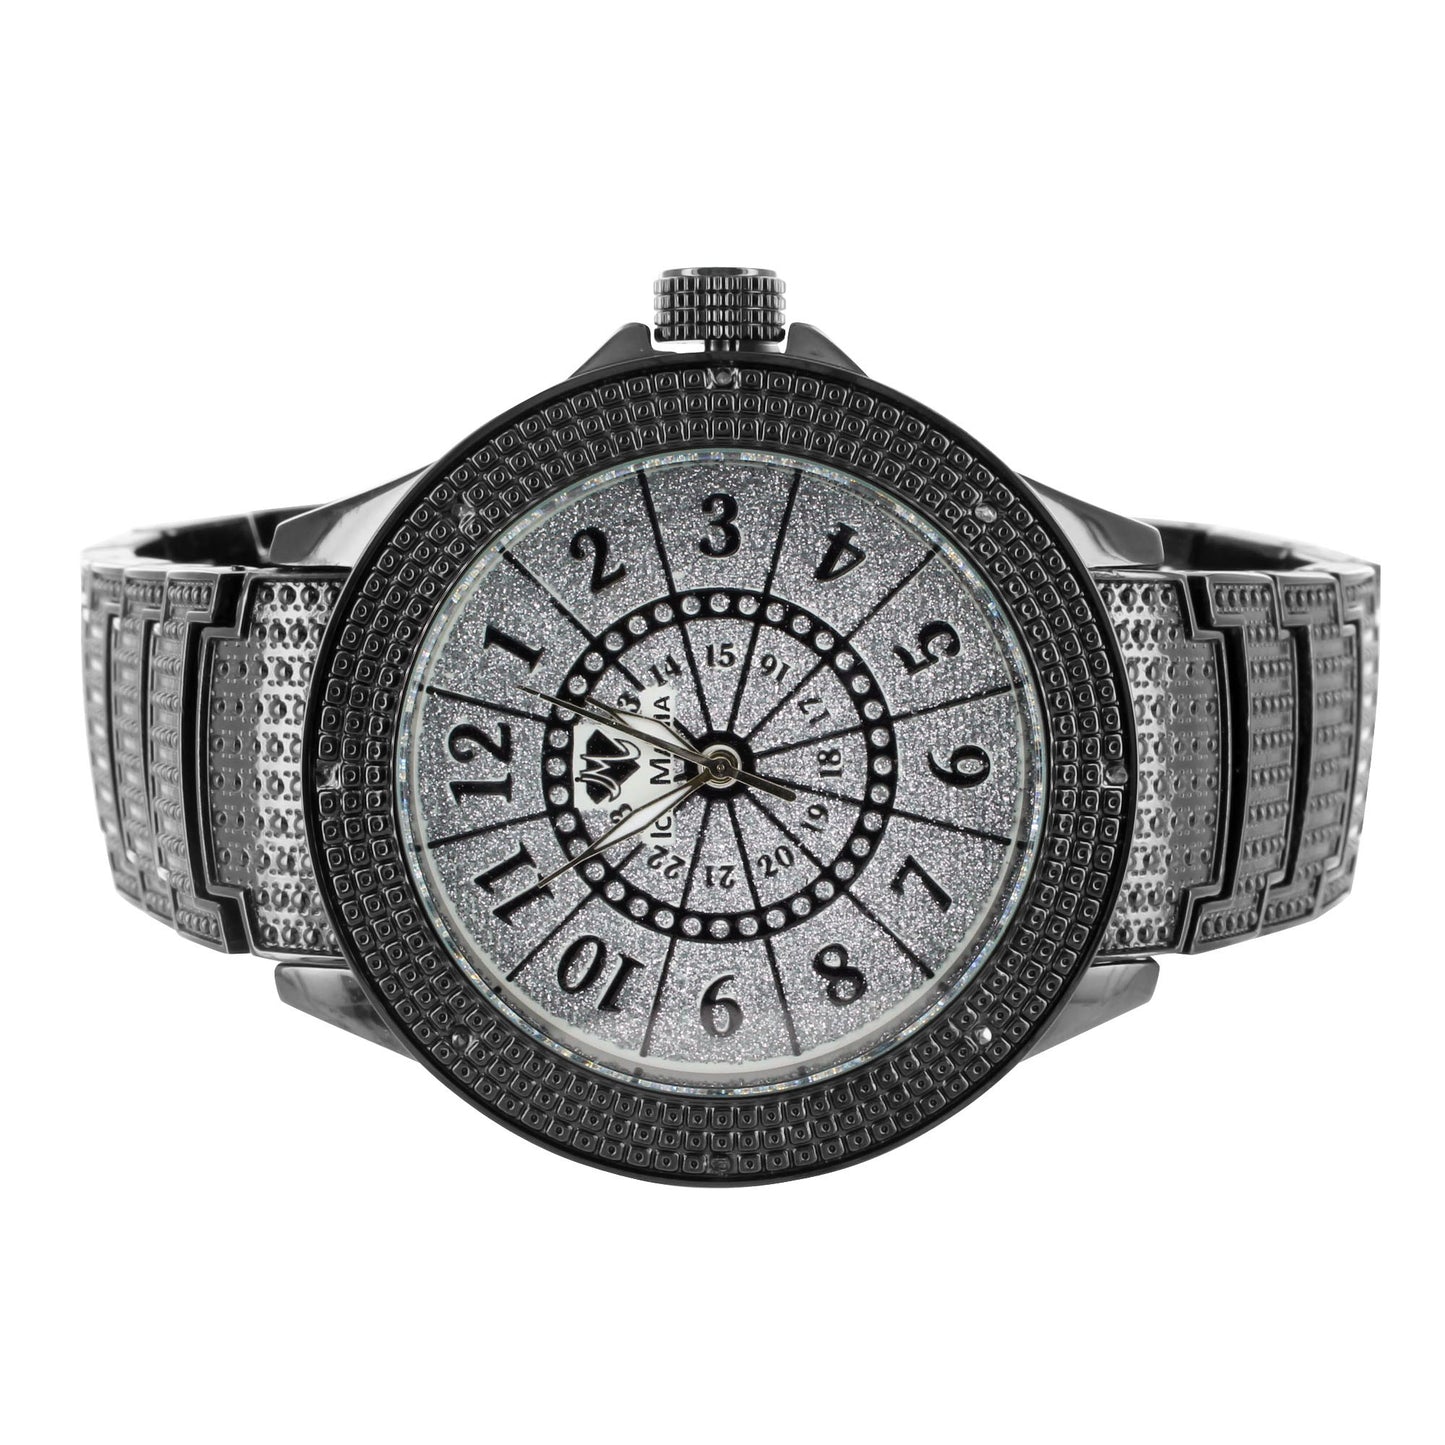 Exquisite Black Gold Finish Ice Mania Real Diamond Watch